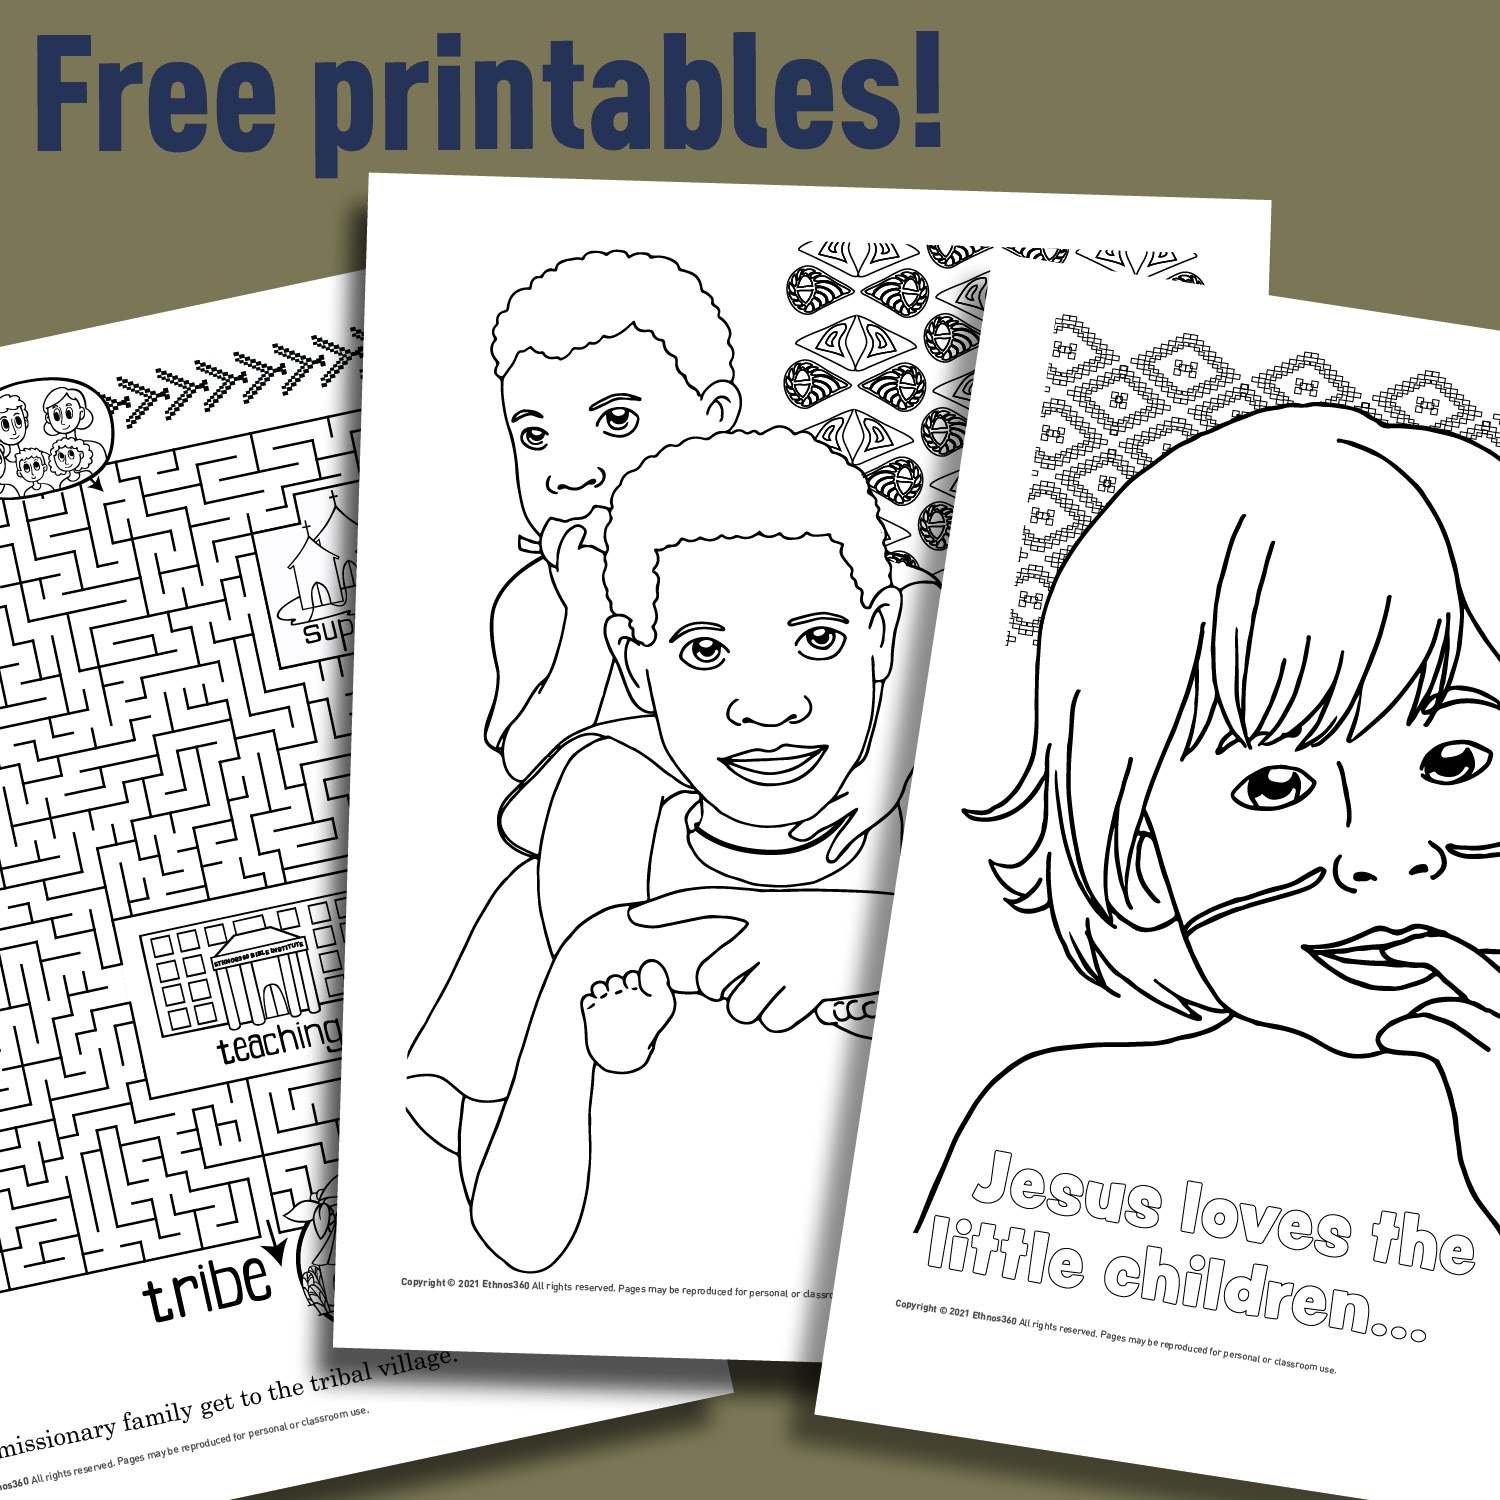 Free Printable Missionary Stories